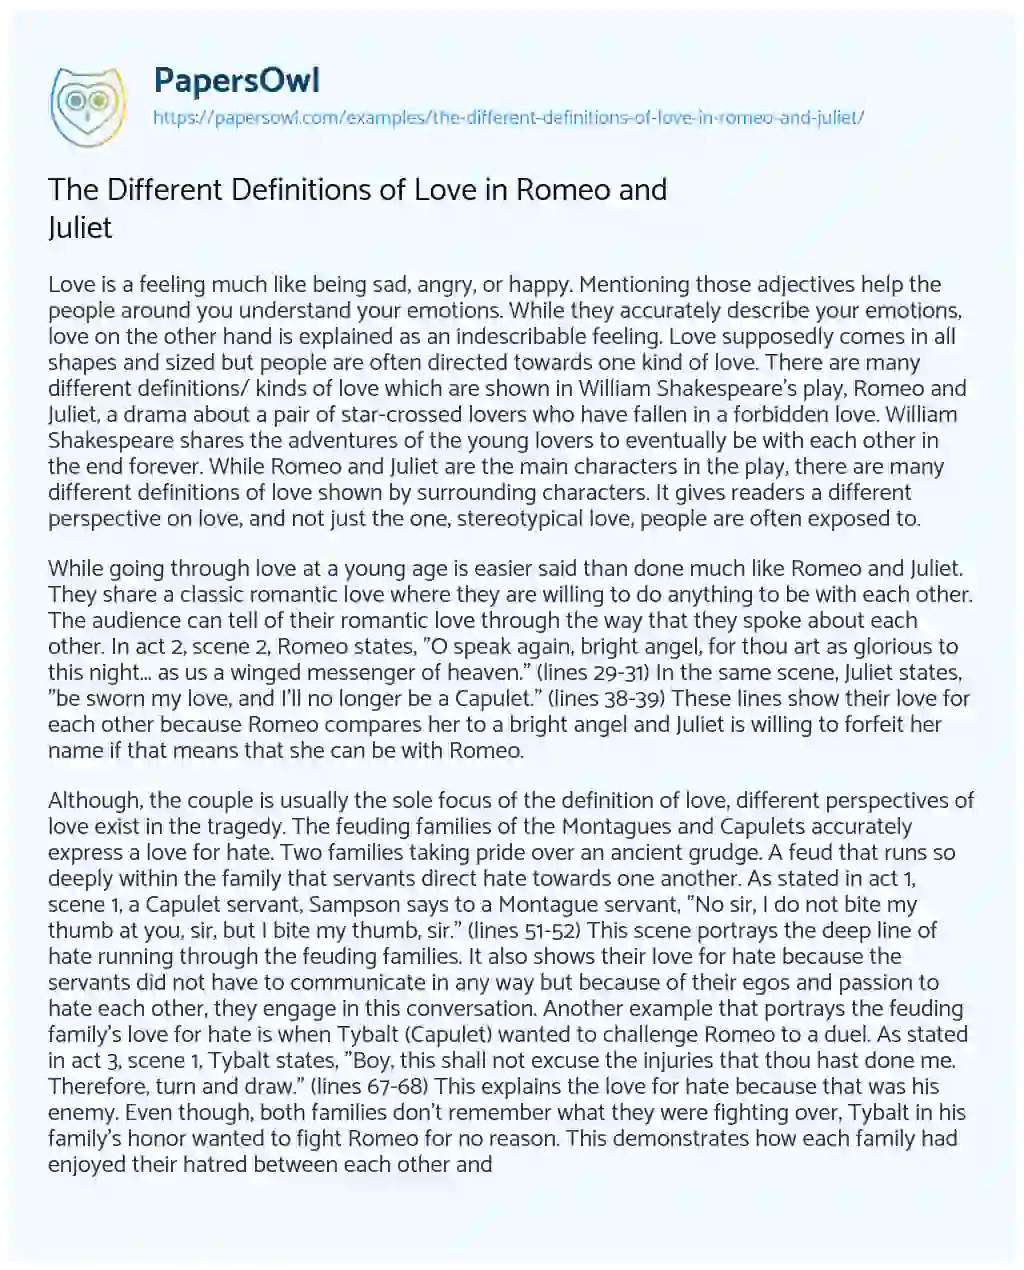 Essay on The Different Definitions of Love in Romeo and Juliet